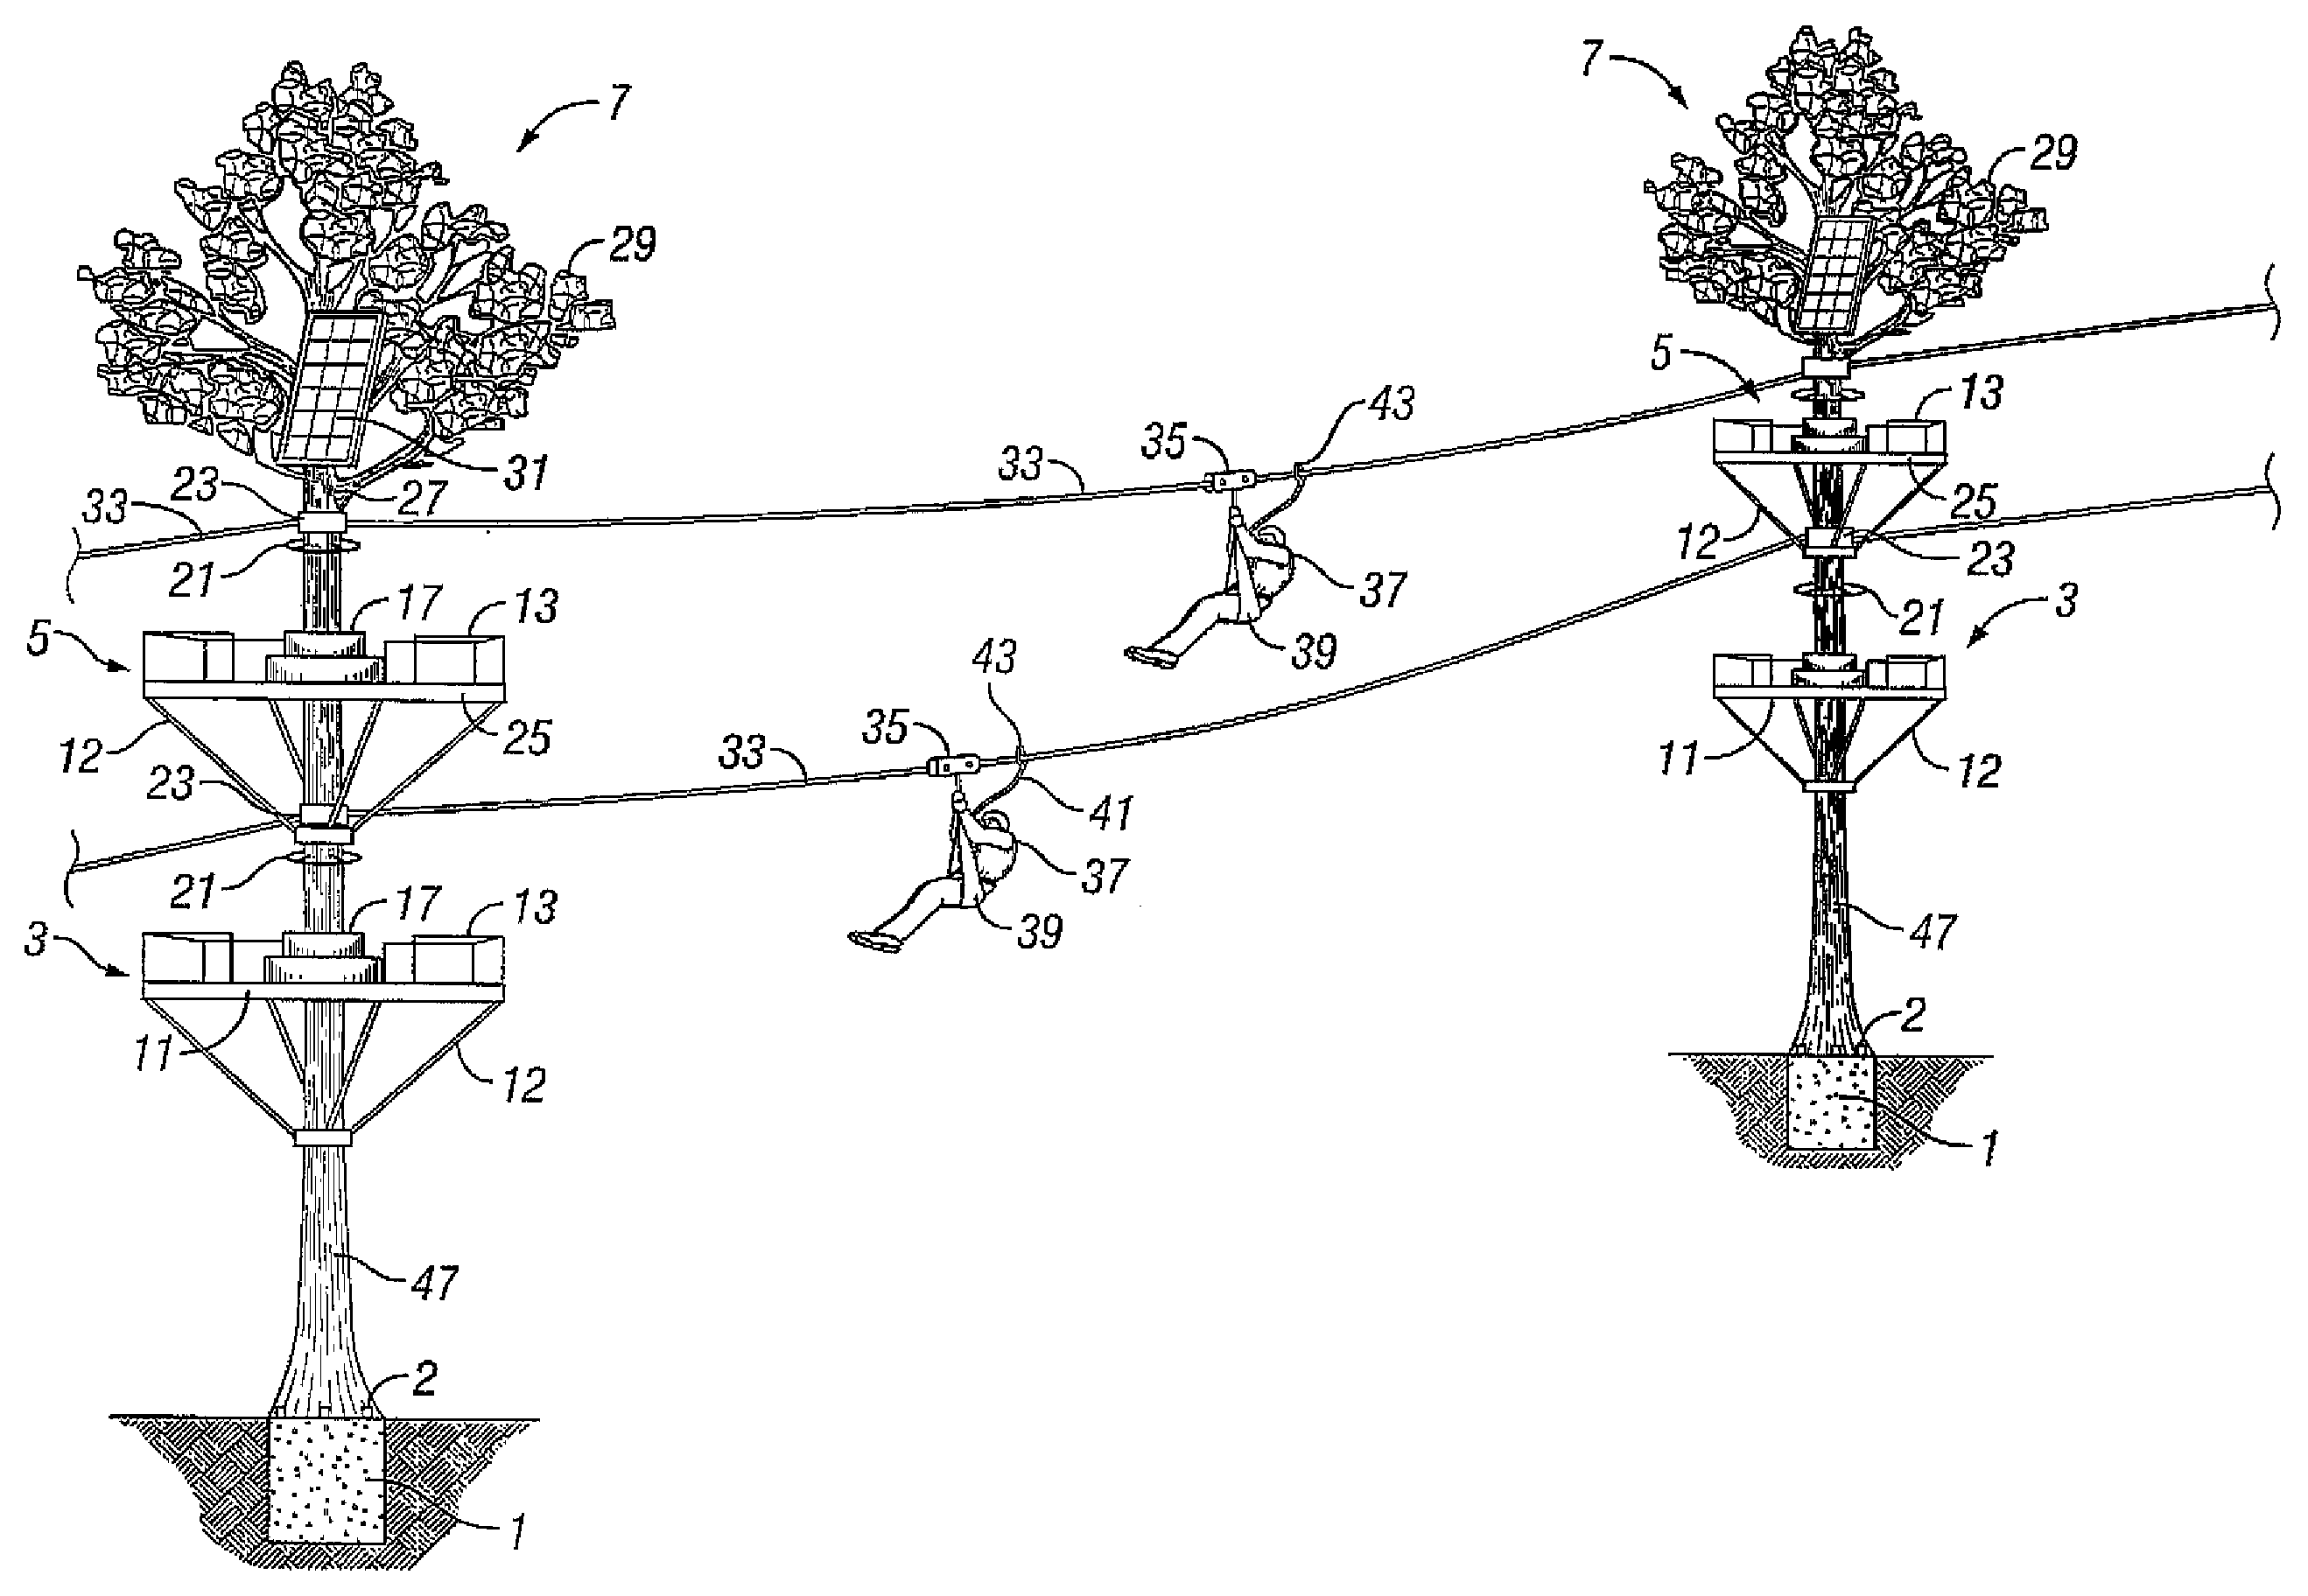 System for tower- and cable-based transportation structure